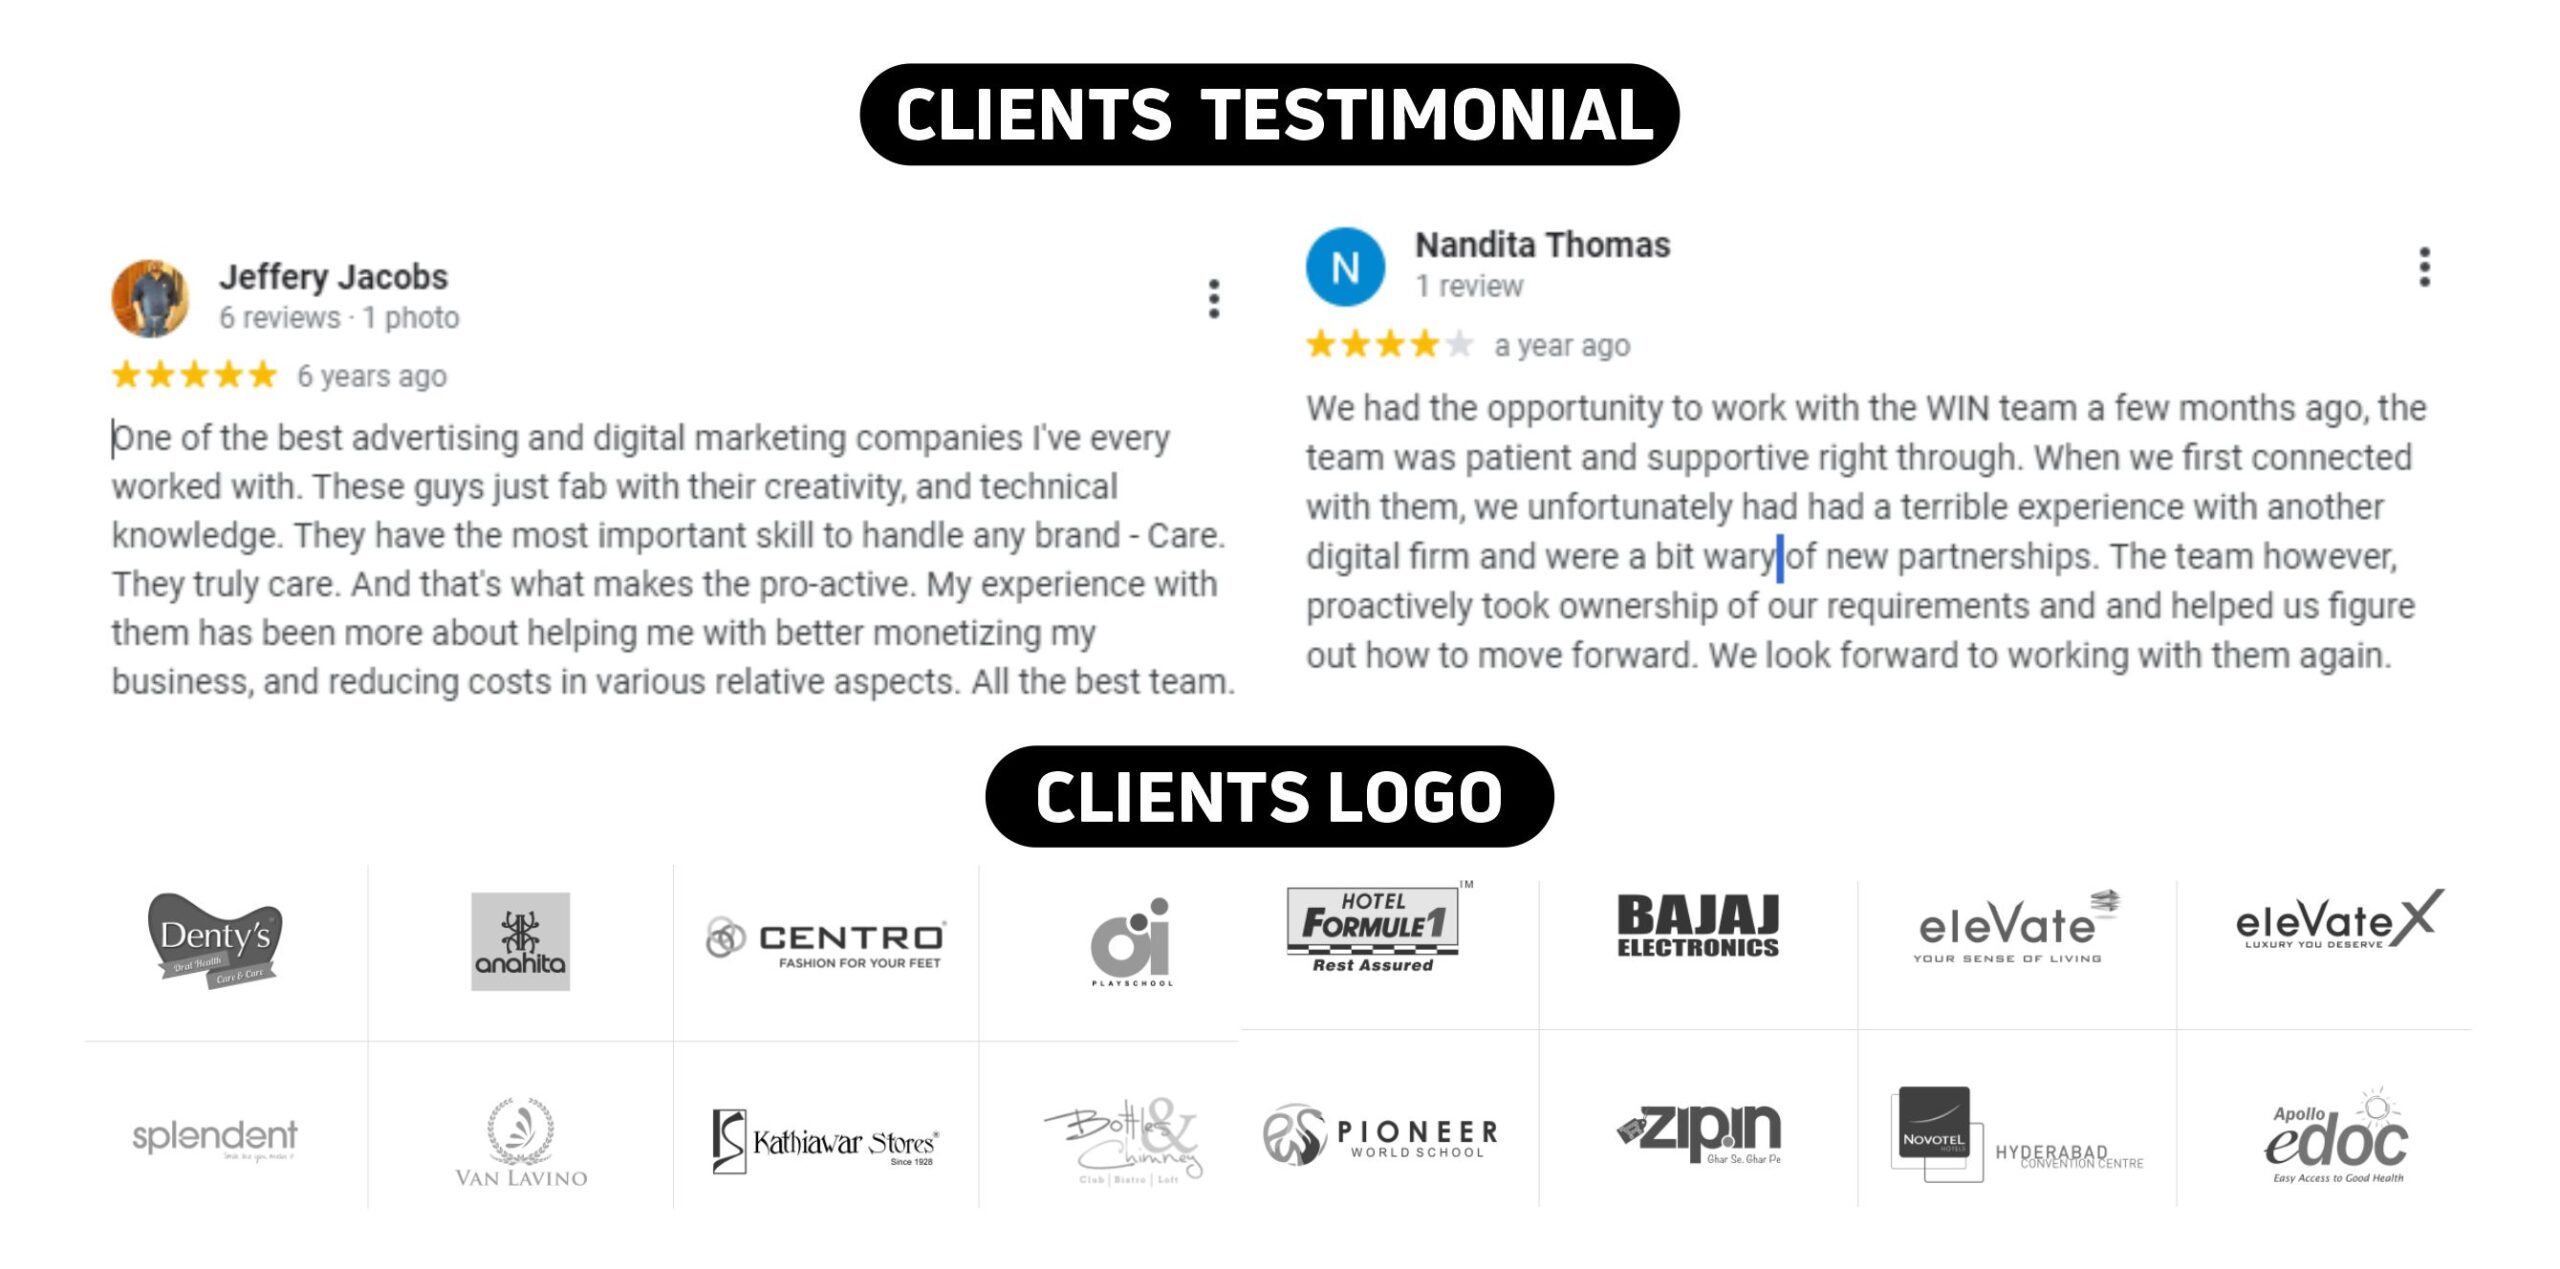 What's In a Name Clients Testimonials & Logos